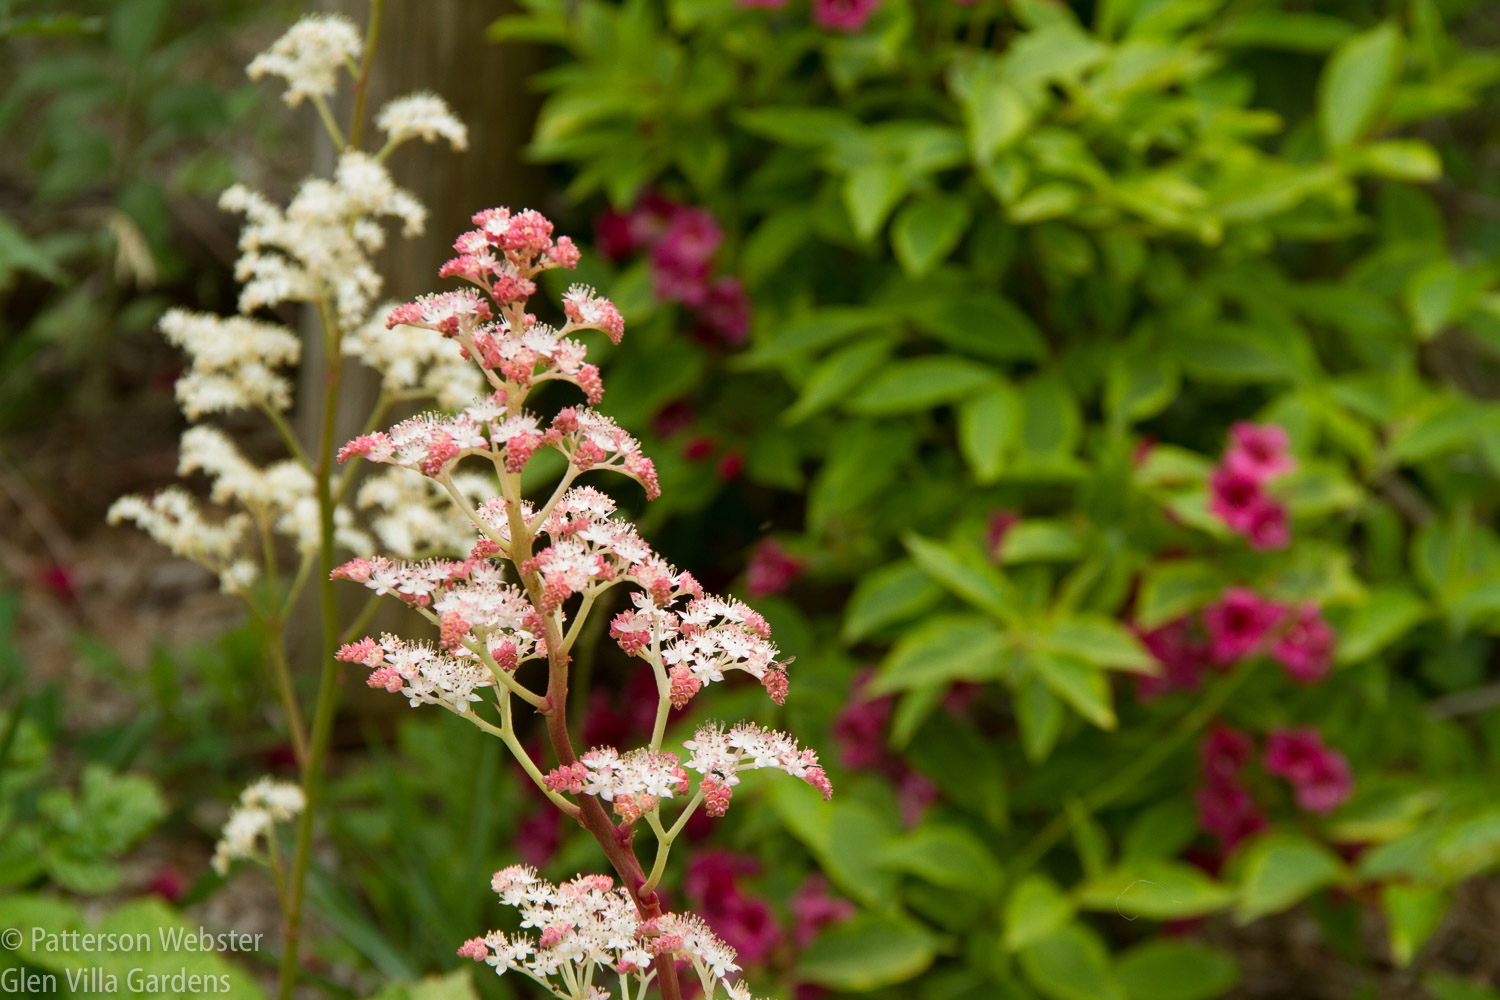 Rodgersia is pink around the edges... I haven't noticed that on the plants before this year.